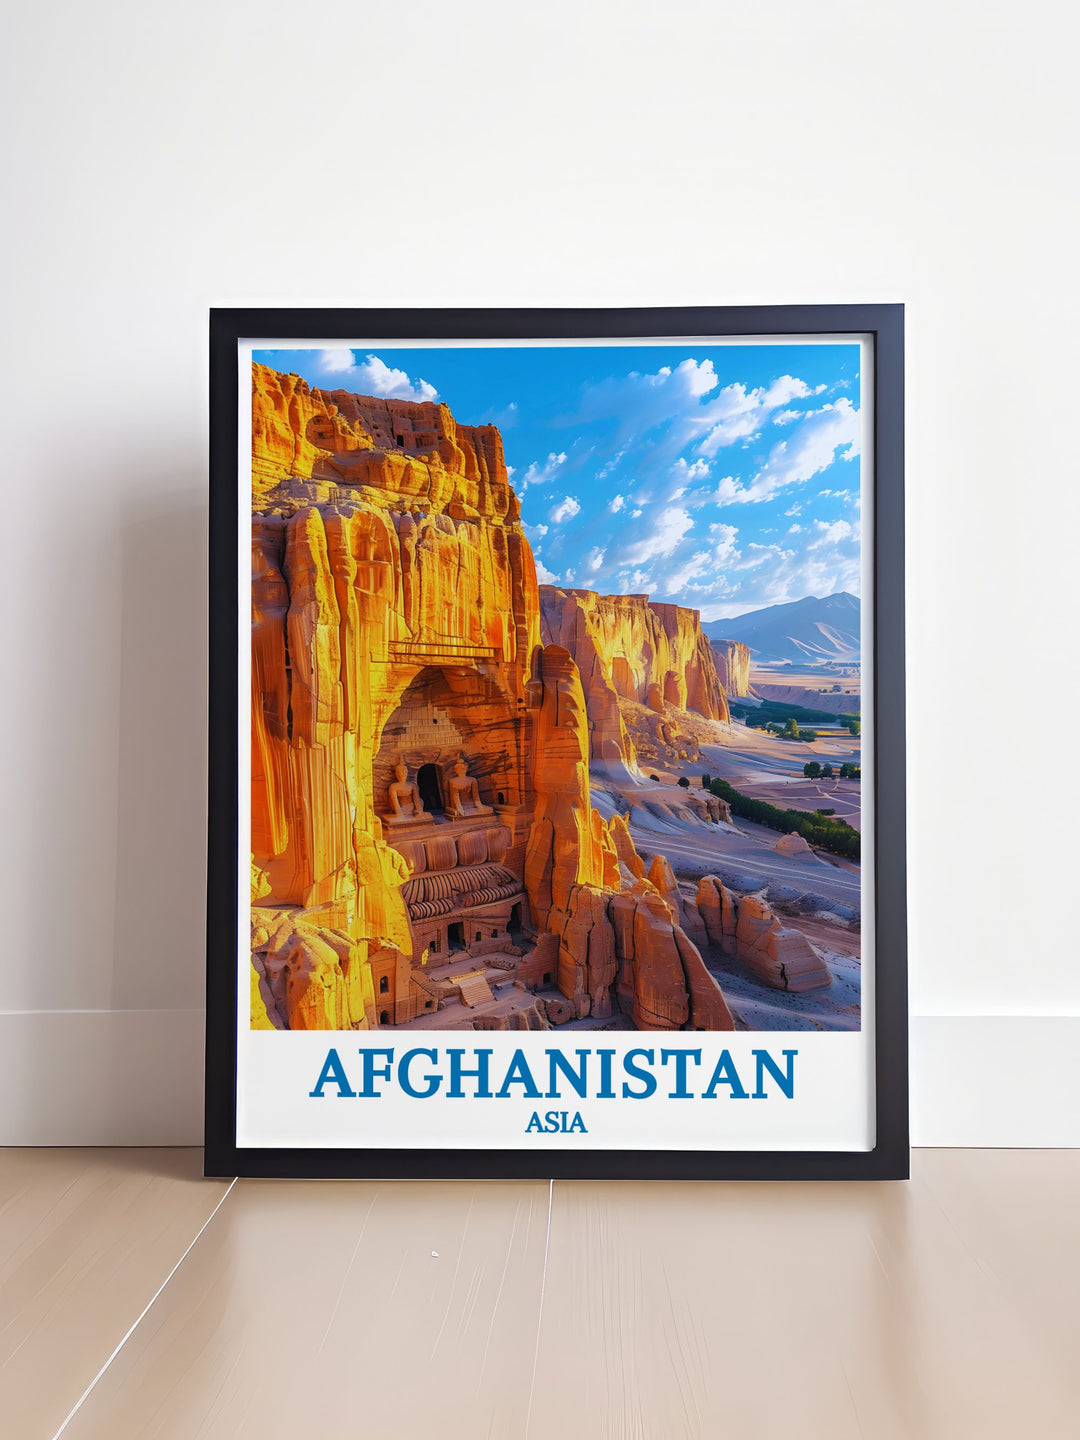 Experience the majestic Bamiyan Buddha Statues through this Afghanistan Wall Art adding a touch of historical elegance to your living space ideal for any decor style and as unique anniversary gifts